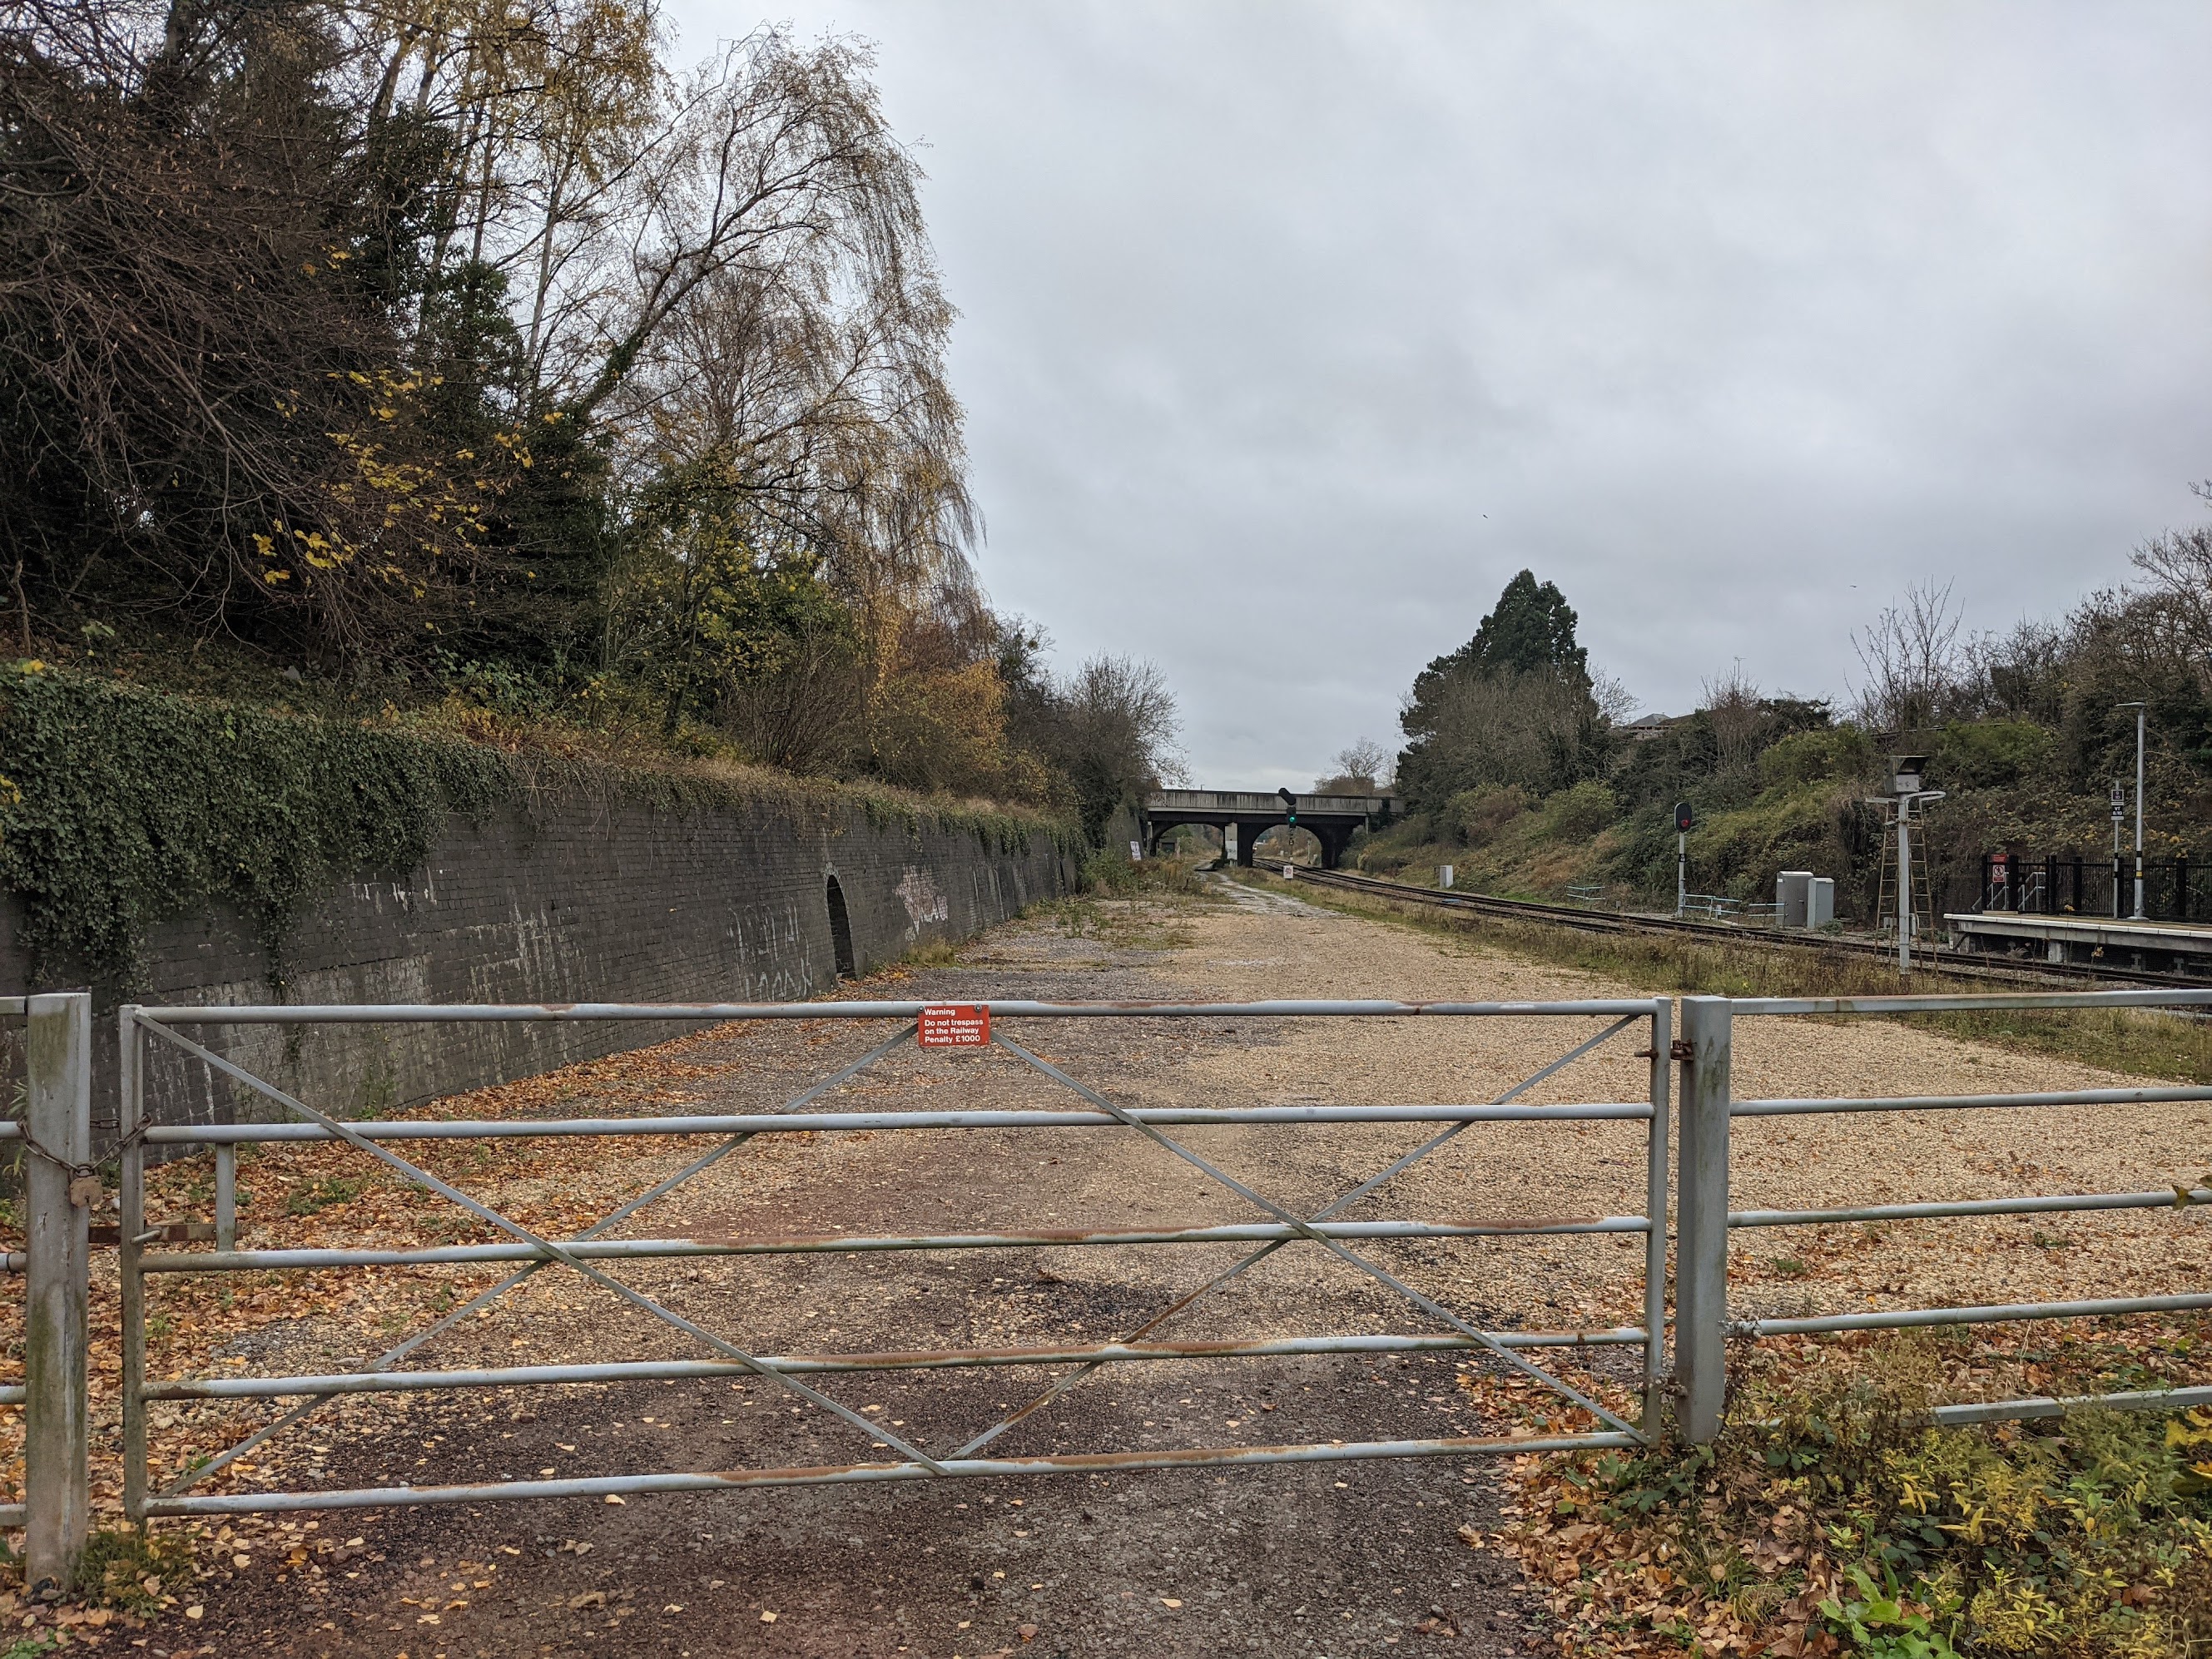 The network rail compound where the continuation of the Honeybourne Line would go through the railway arch to connect Cheltenham Spa station to the Gloucestershire County Council cycle spine on the A40, and the Shelburne Road